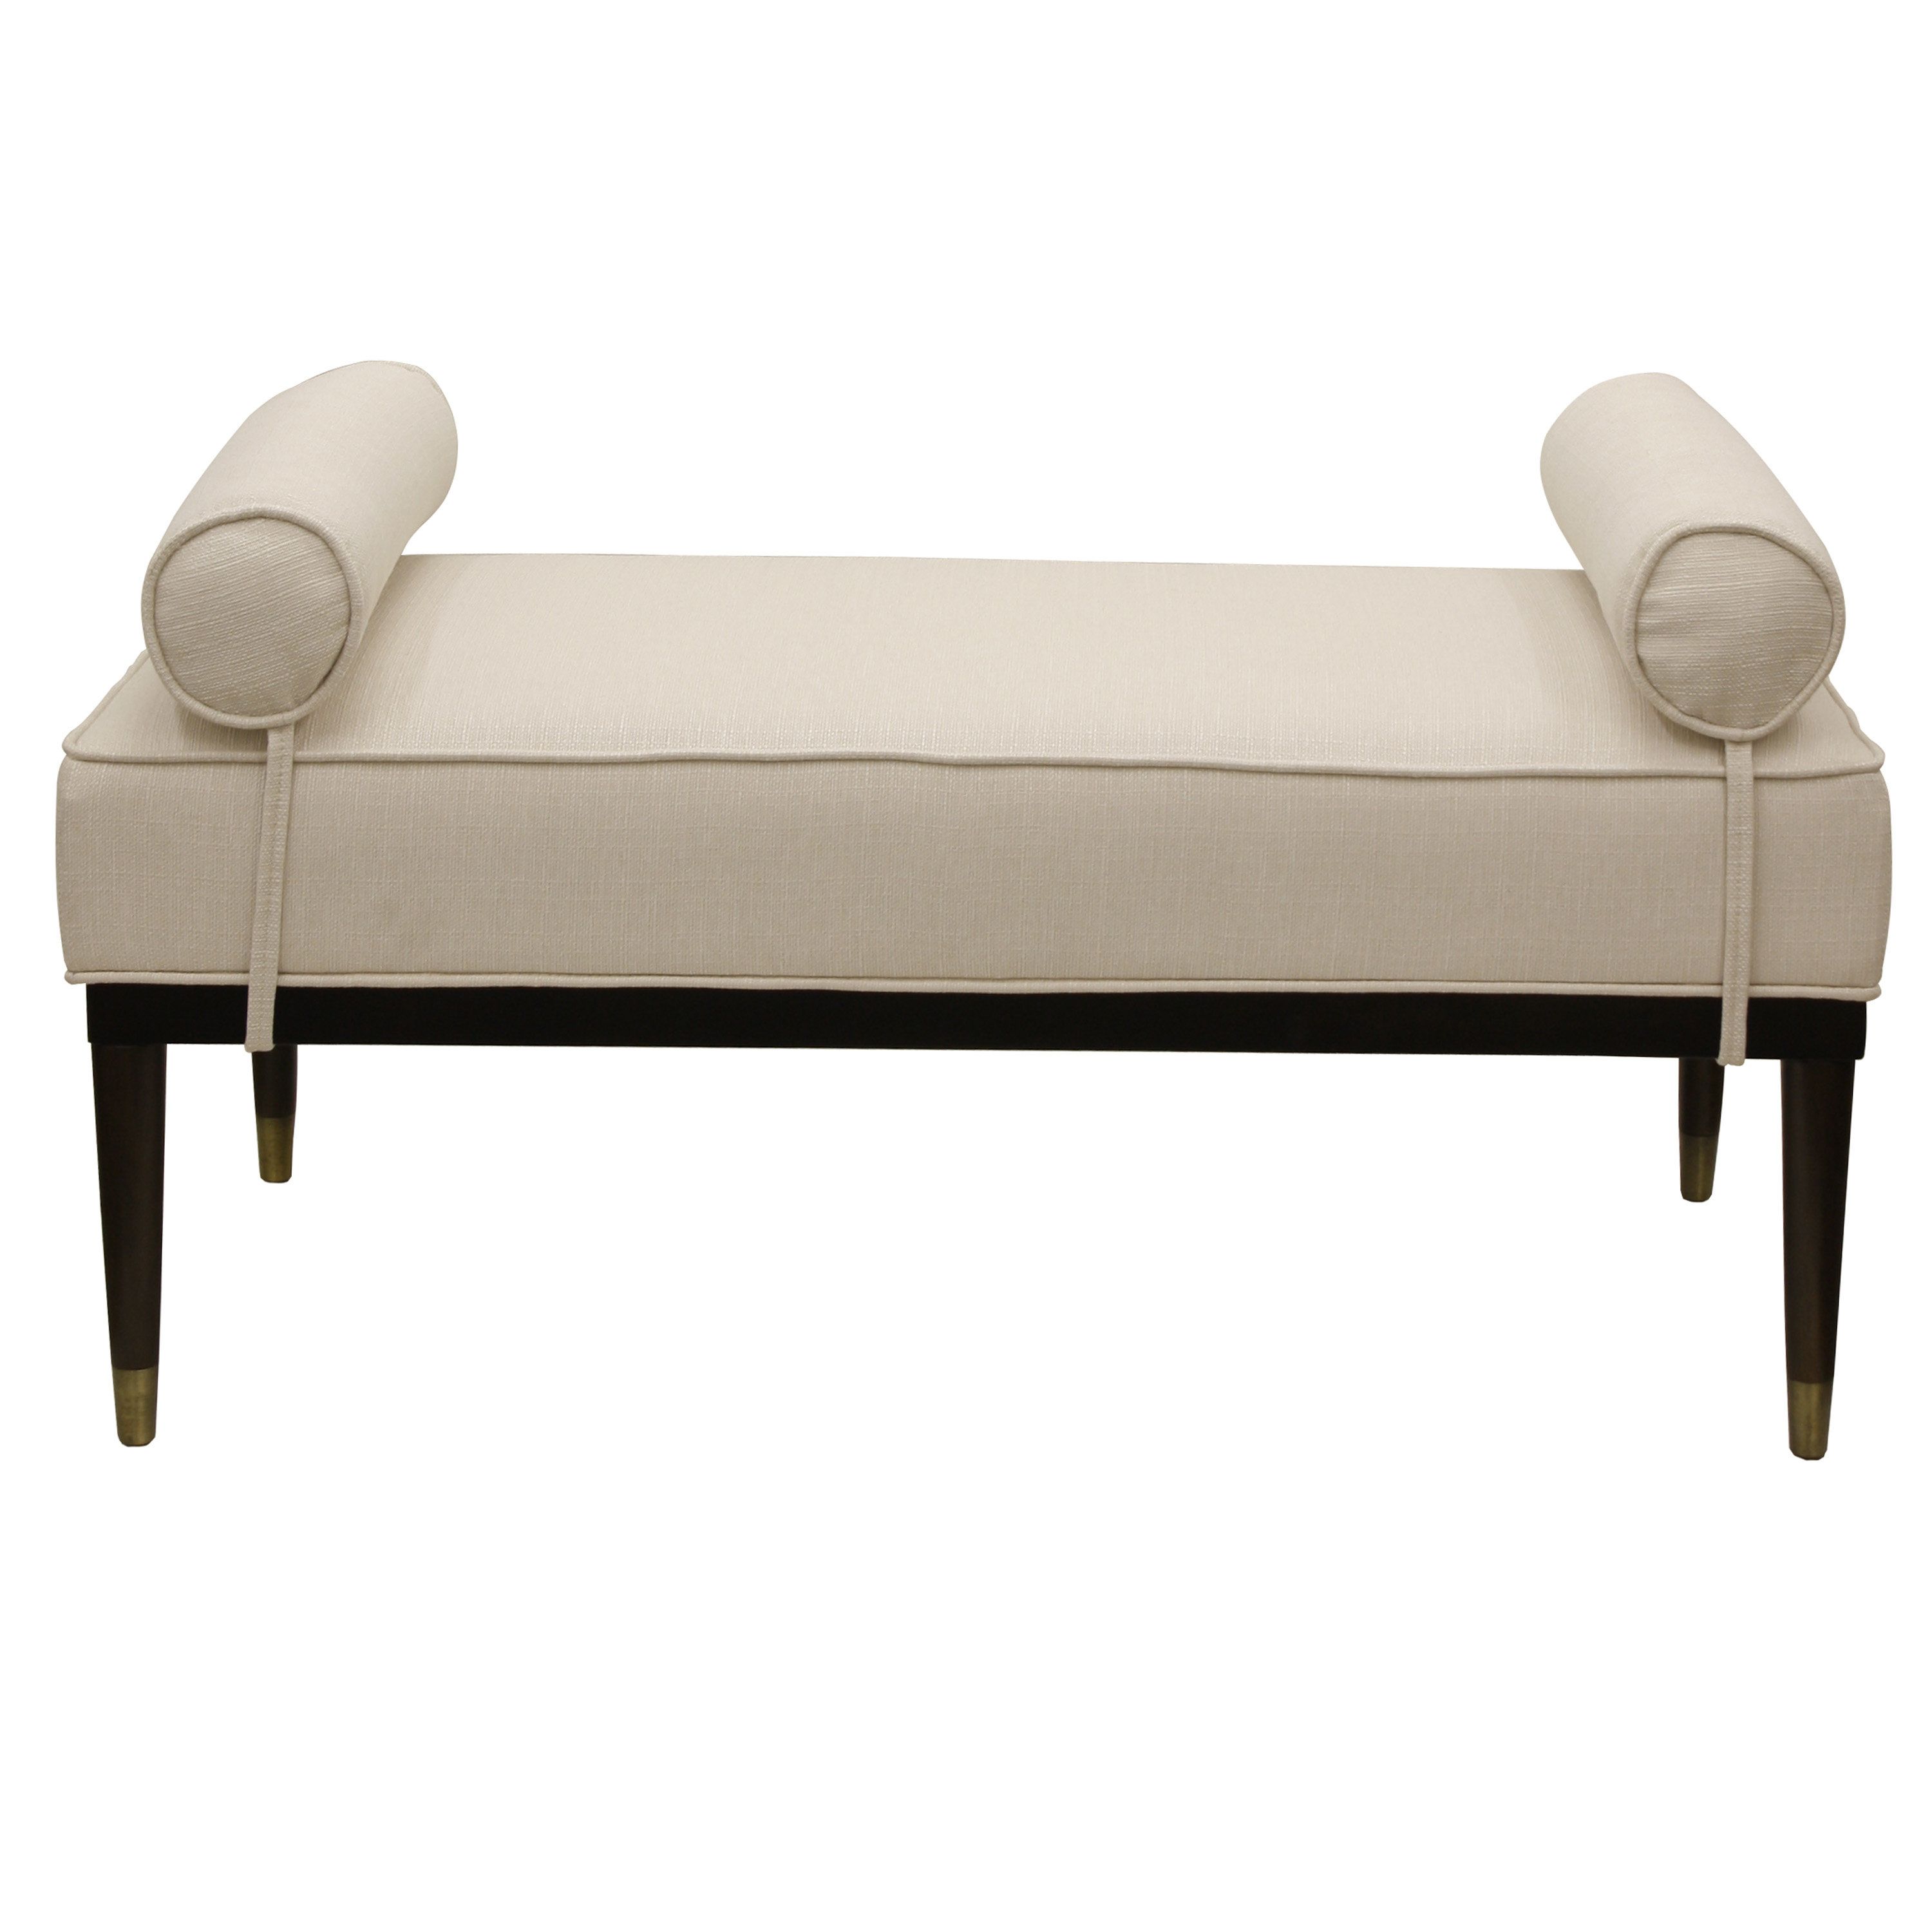 Wrought Studio Ames Upholstered Bench | Wayfair Pertaining To Ames Arm Sofa Chairs (View 18 of 20)